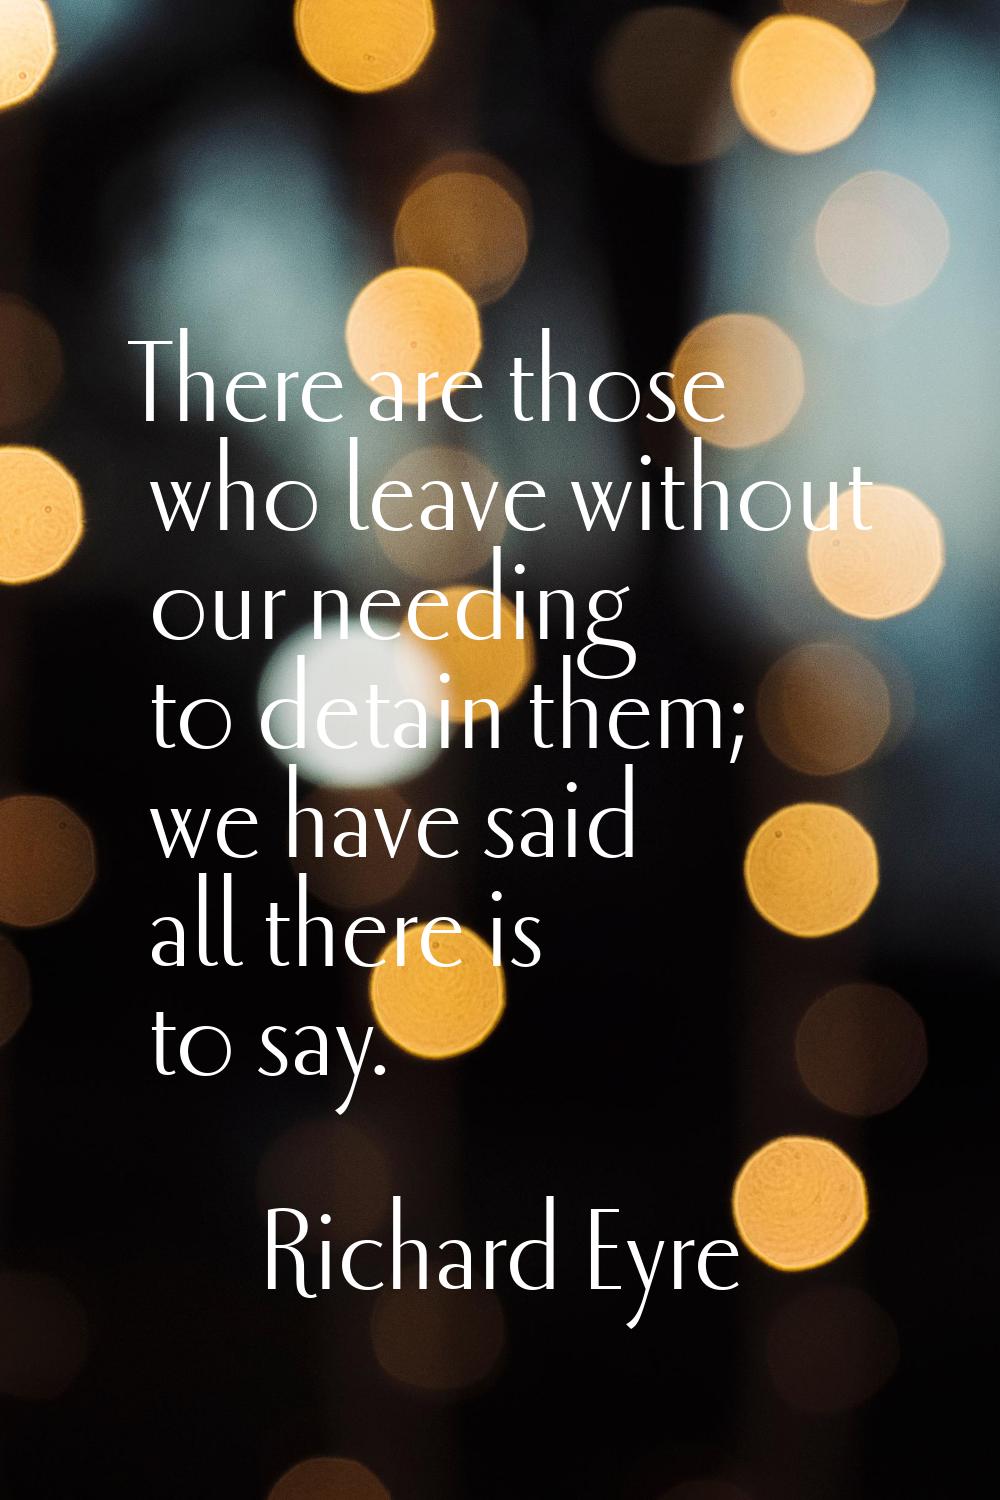 There are those who leave without our needing to detain them; we have said all there is to say.